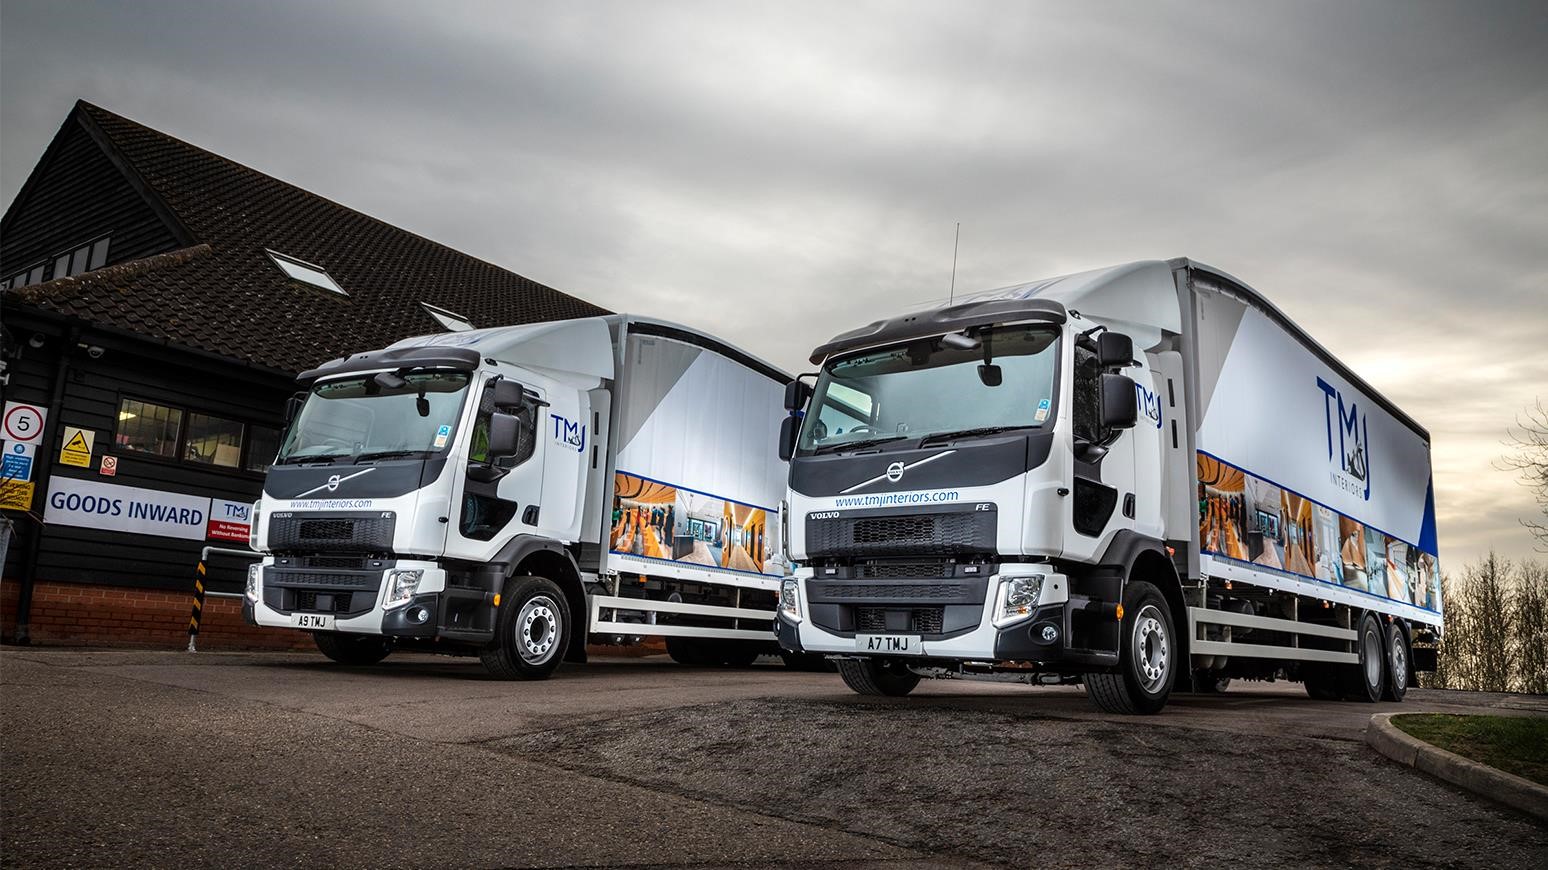 Ipswich-Based TMJ Interiors Adds Two New Volvo FE Trucks, With A Third On The Way